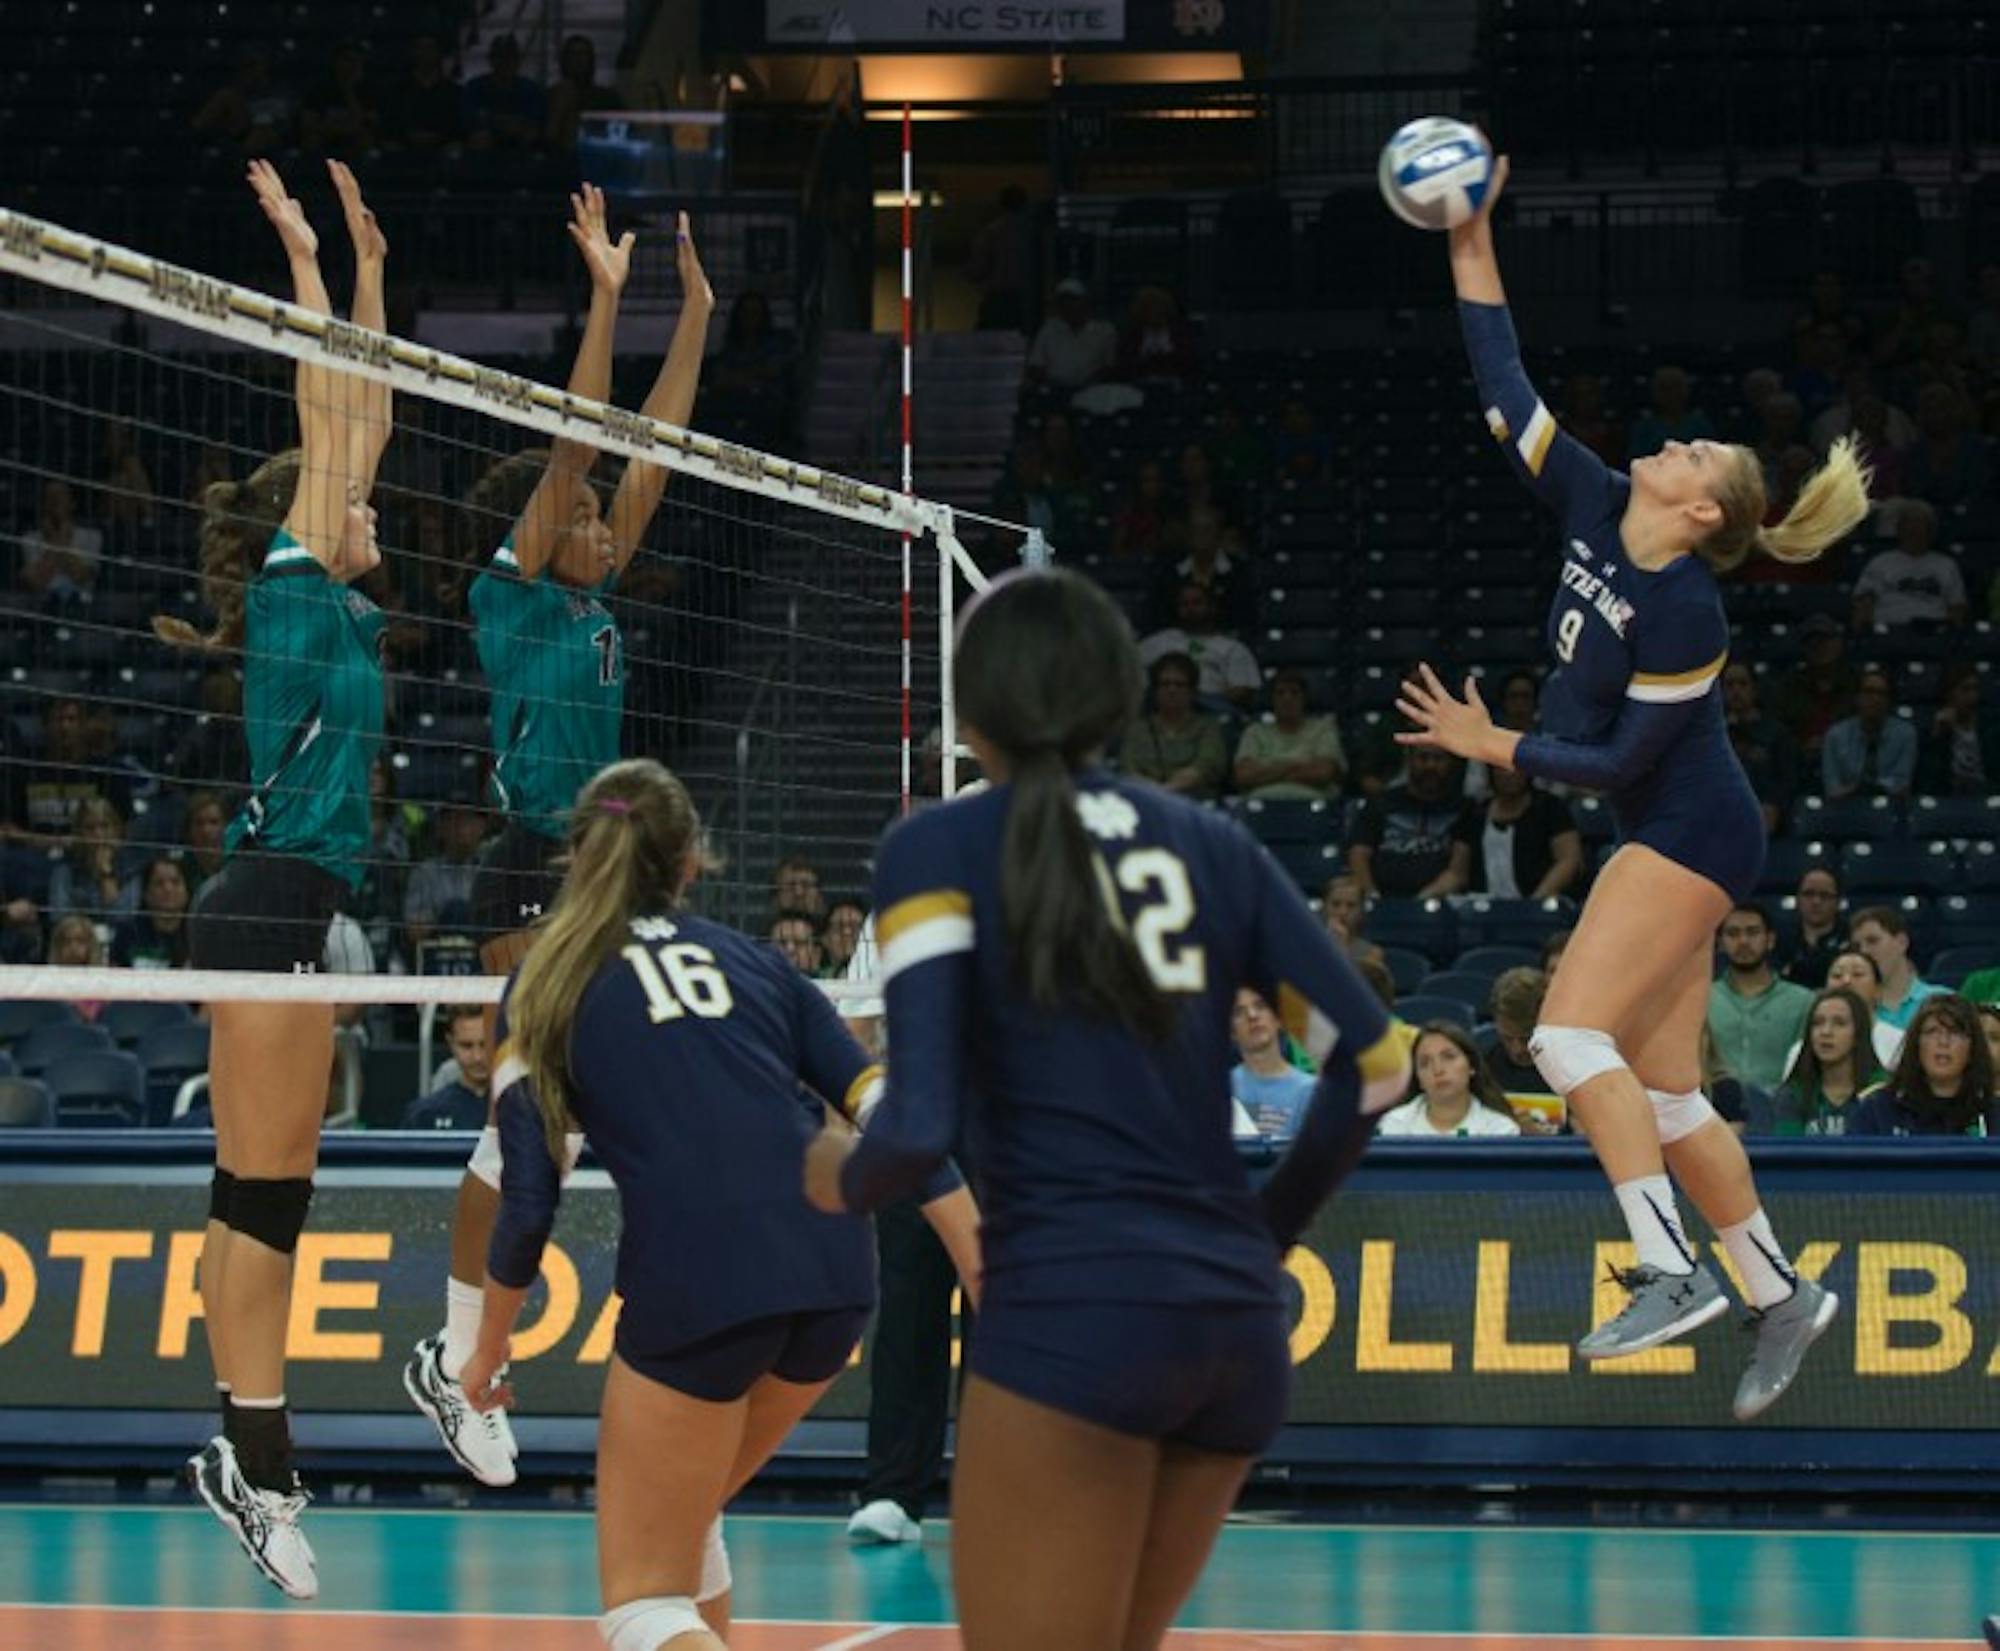 Irish sophomore outside hitter Rebecca Nunge spikes the ball during Notre Dame’s 3-0 loss to Coastal Carolina on Sept. 2 at Purcell Pavilion.